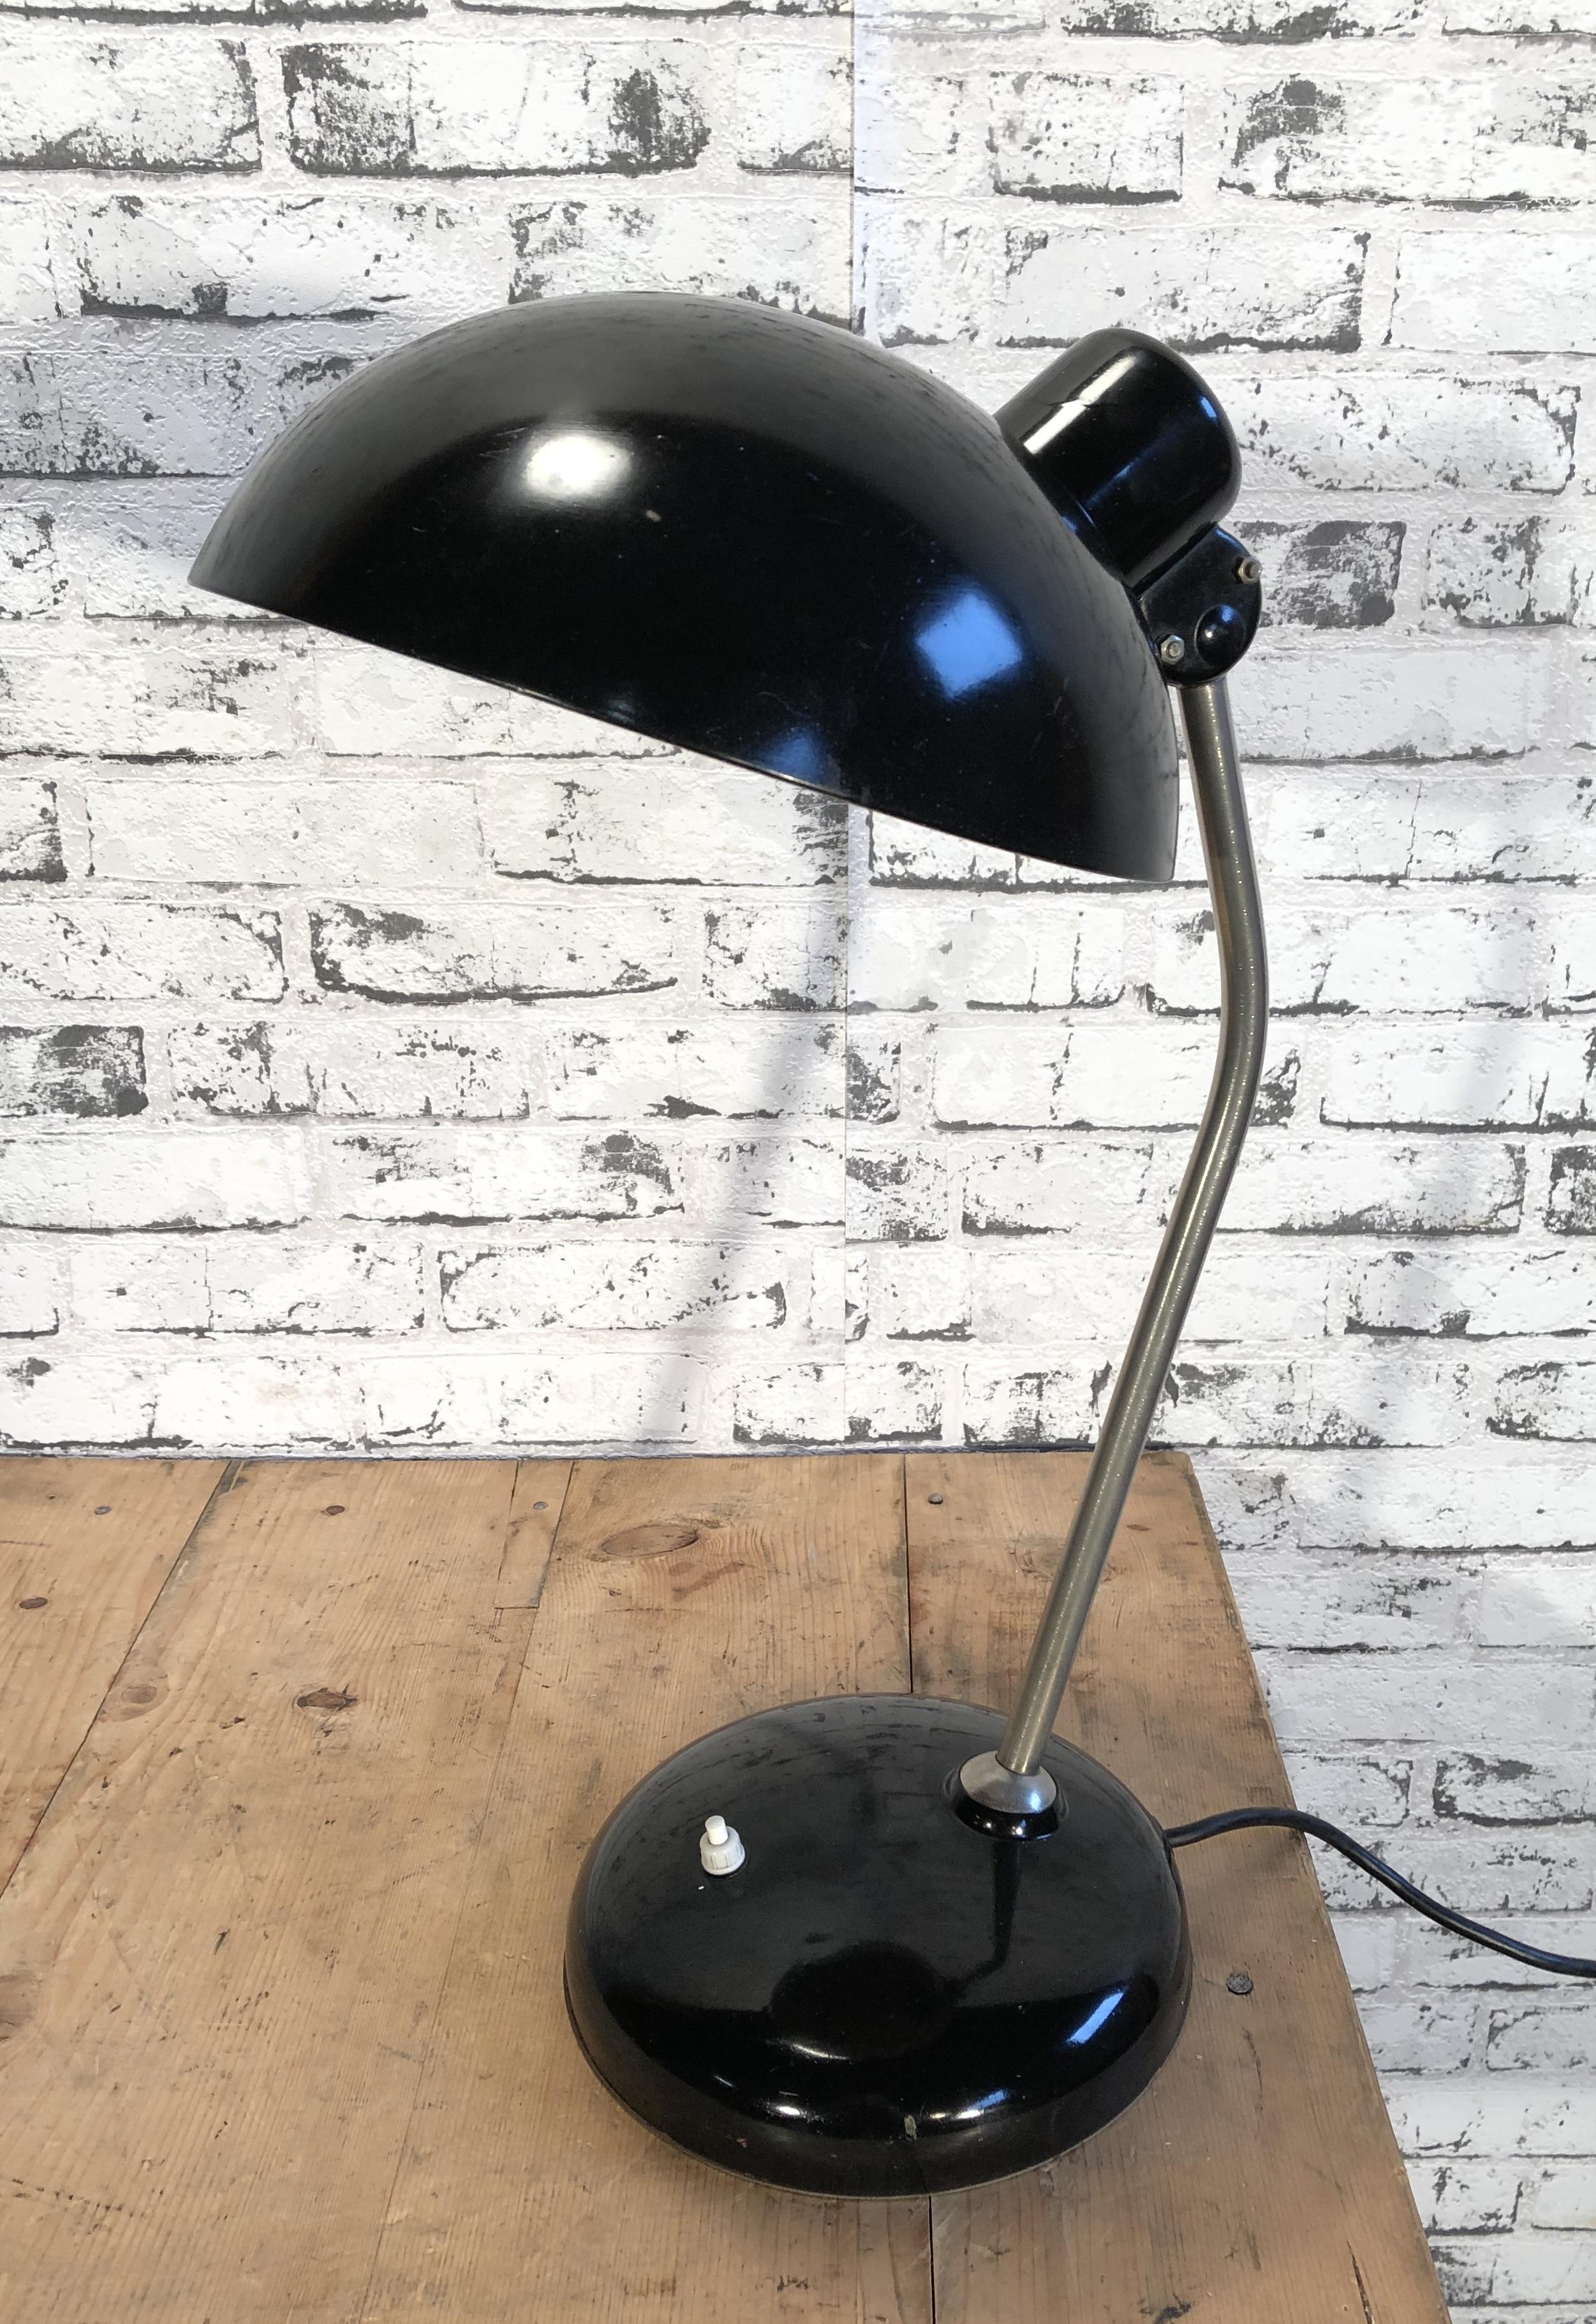 Black Industrial table lamp was made during the 1930s. It features a black shade and base, chrome-plated arm with two adjustable joints. Original socket for E 27 lightbulbs. Fully functional.